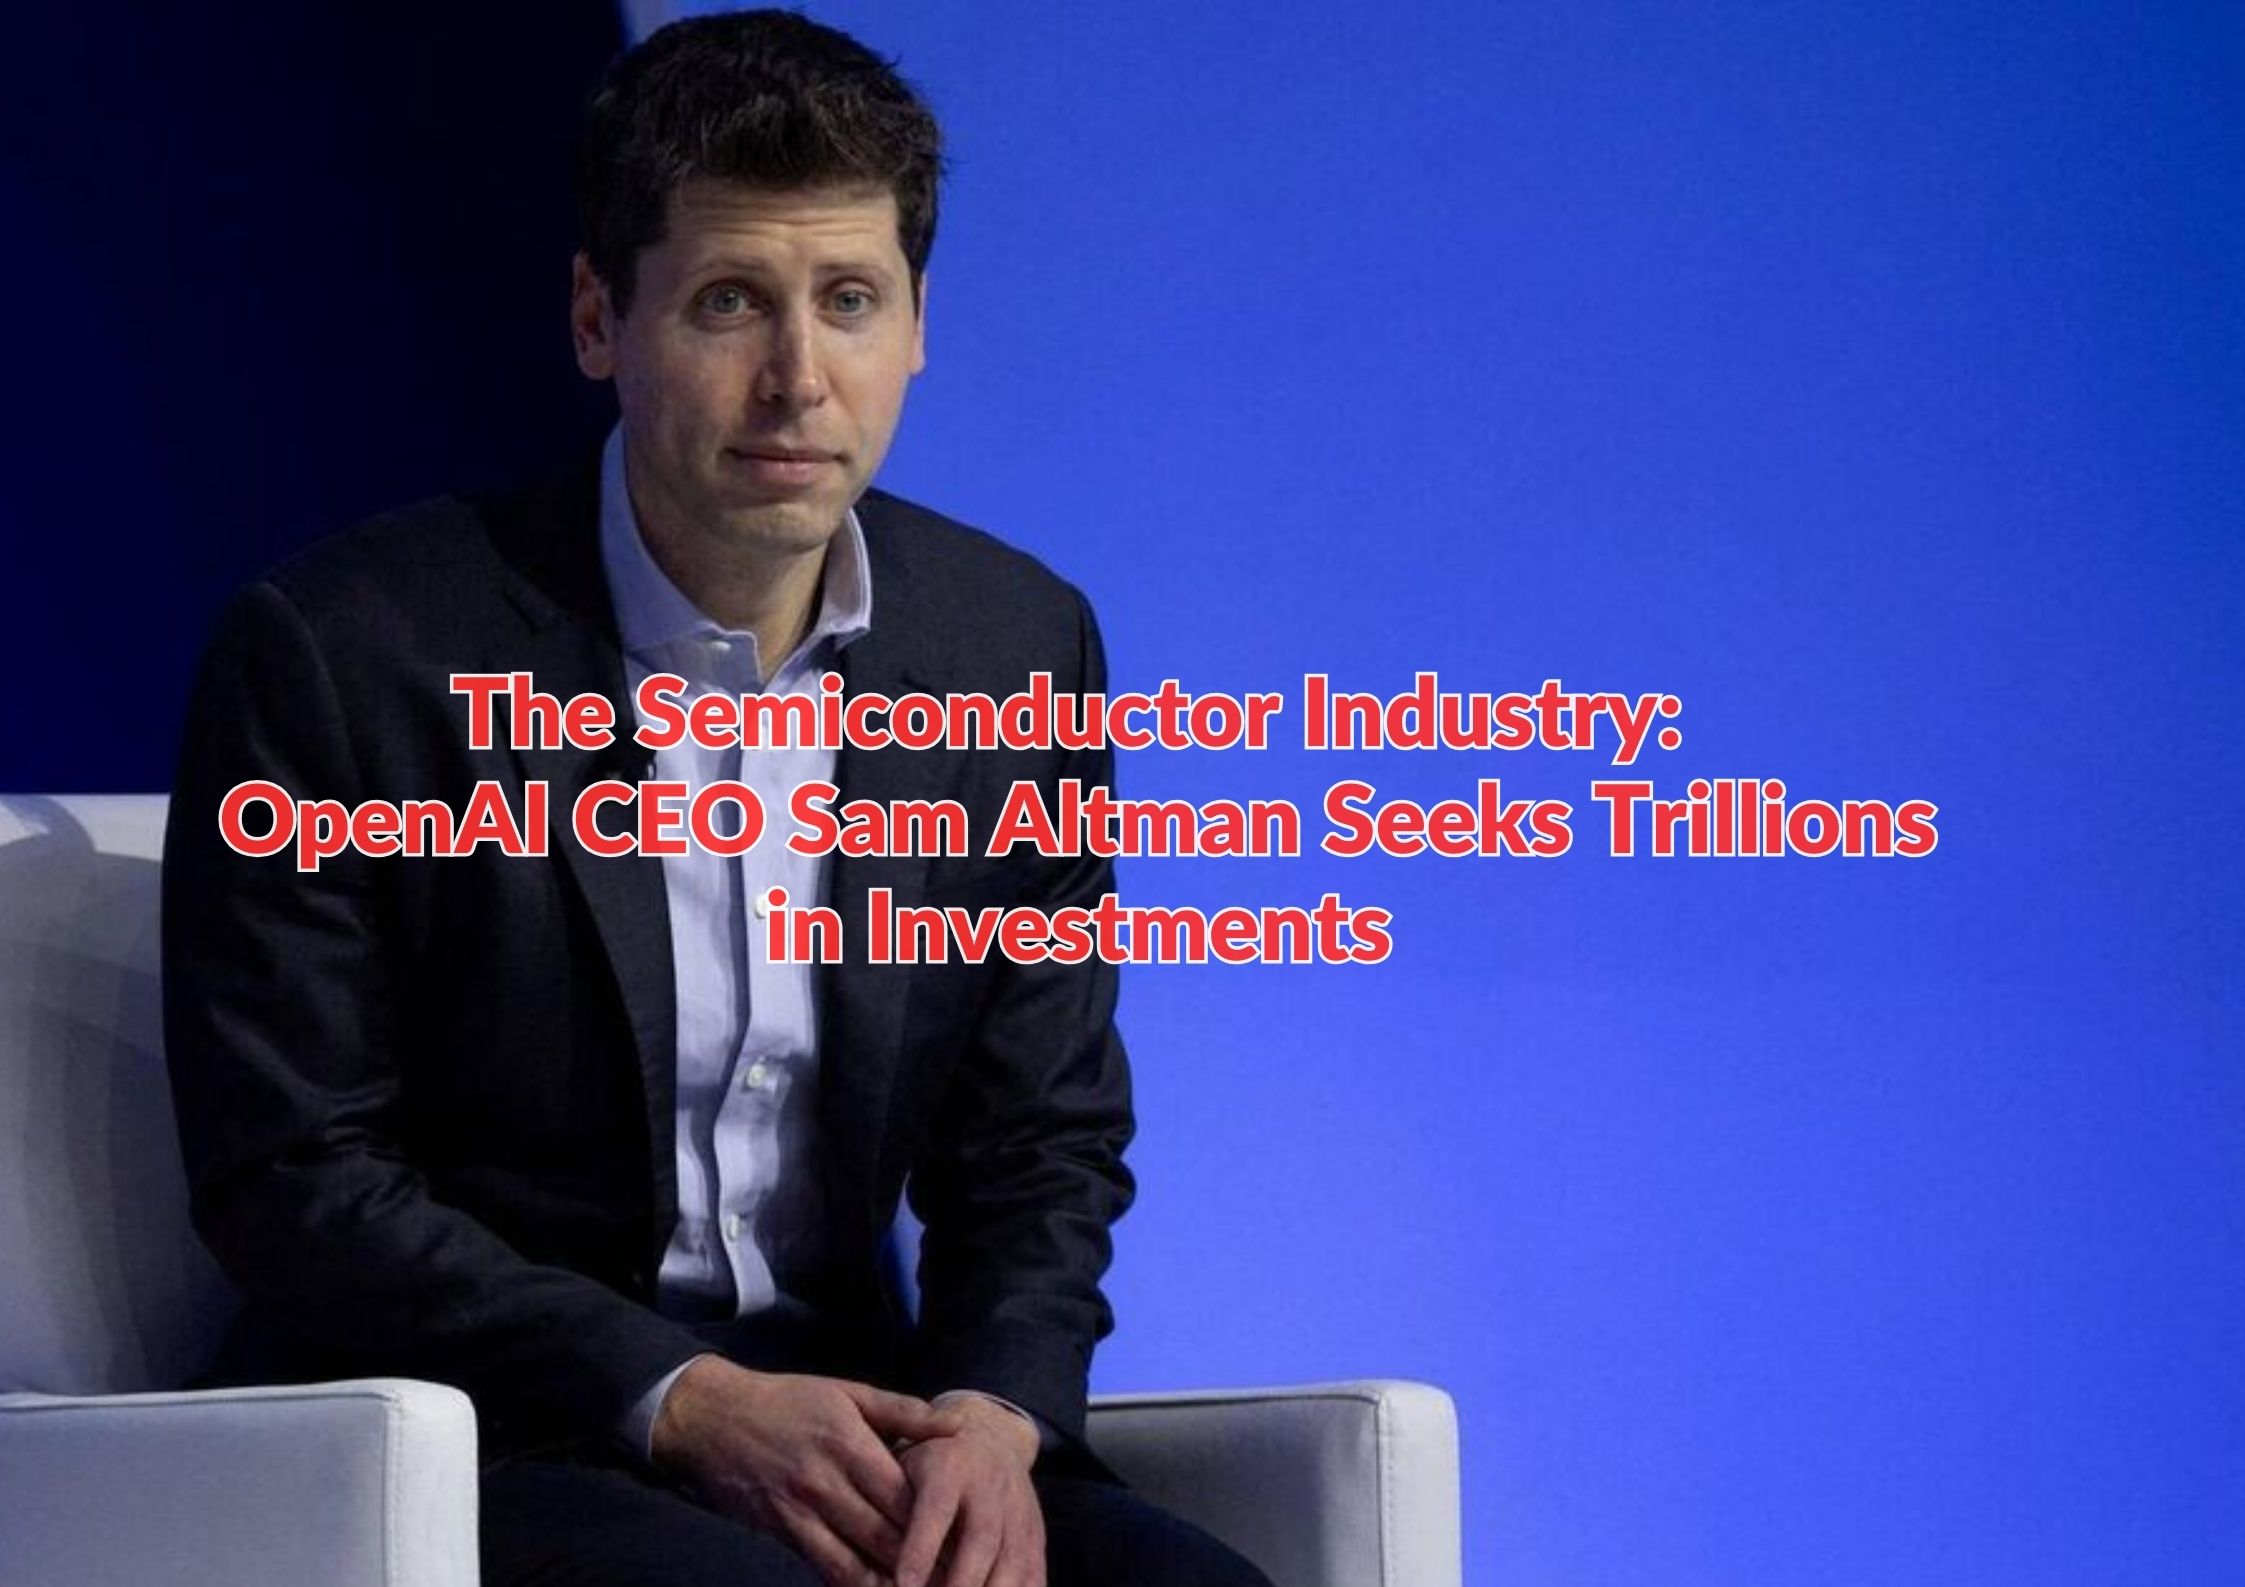 The Semiconductor Industry: OpenAI CEO Sam Altman Seeks Trillions in Investments